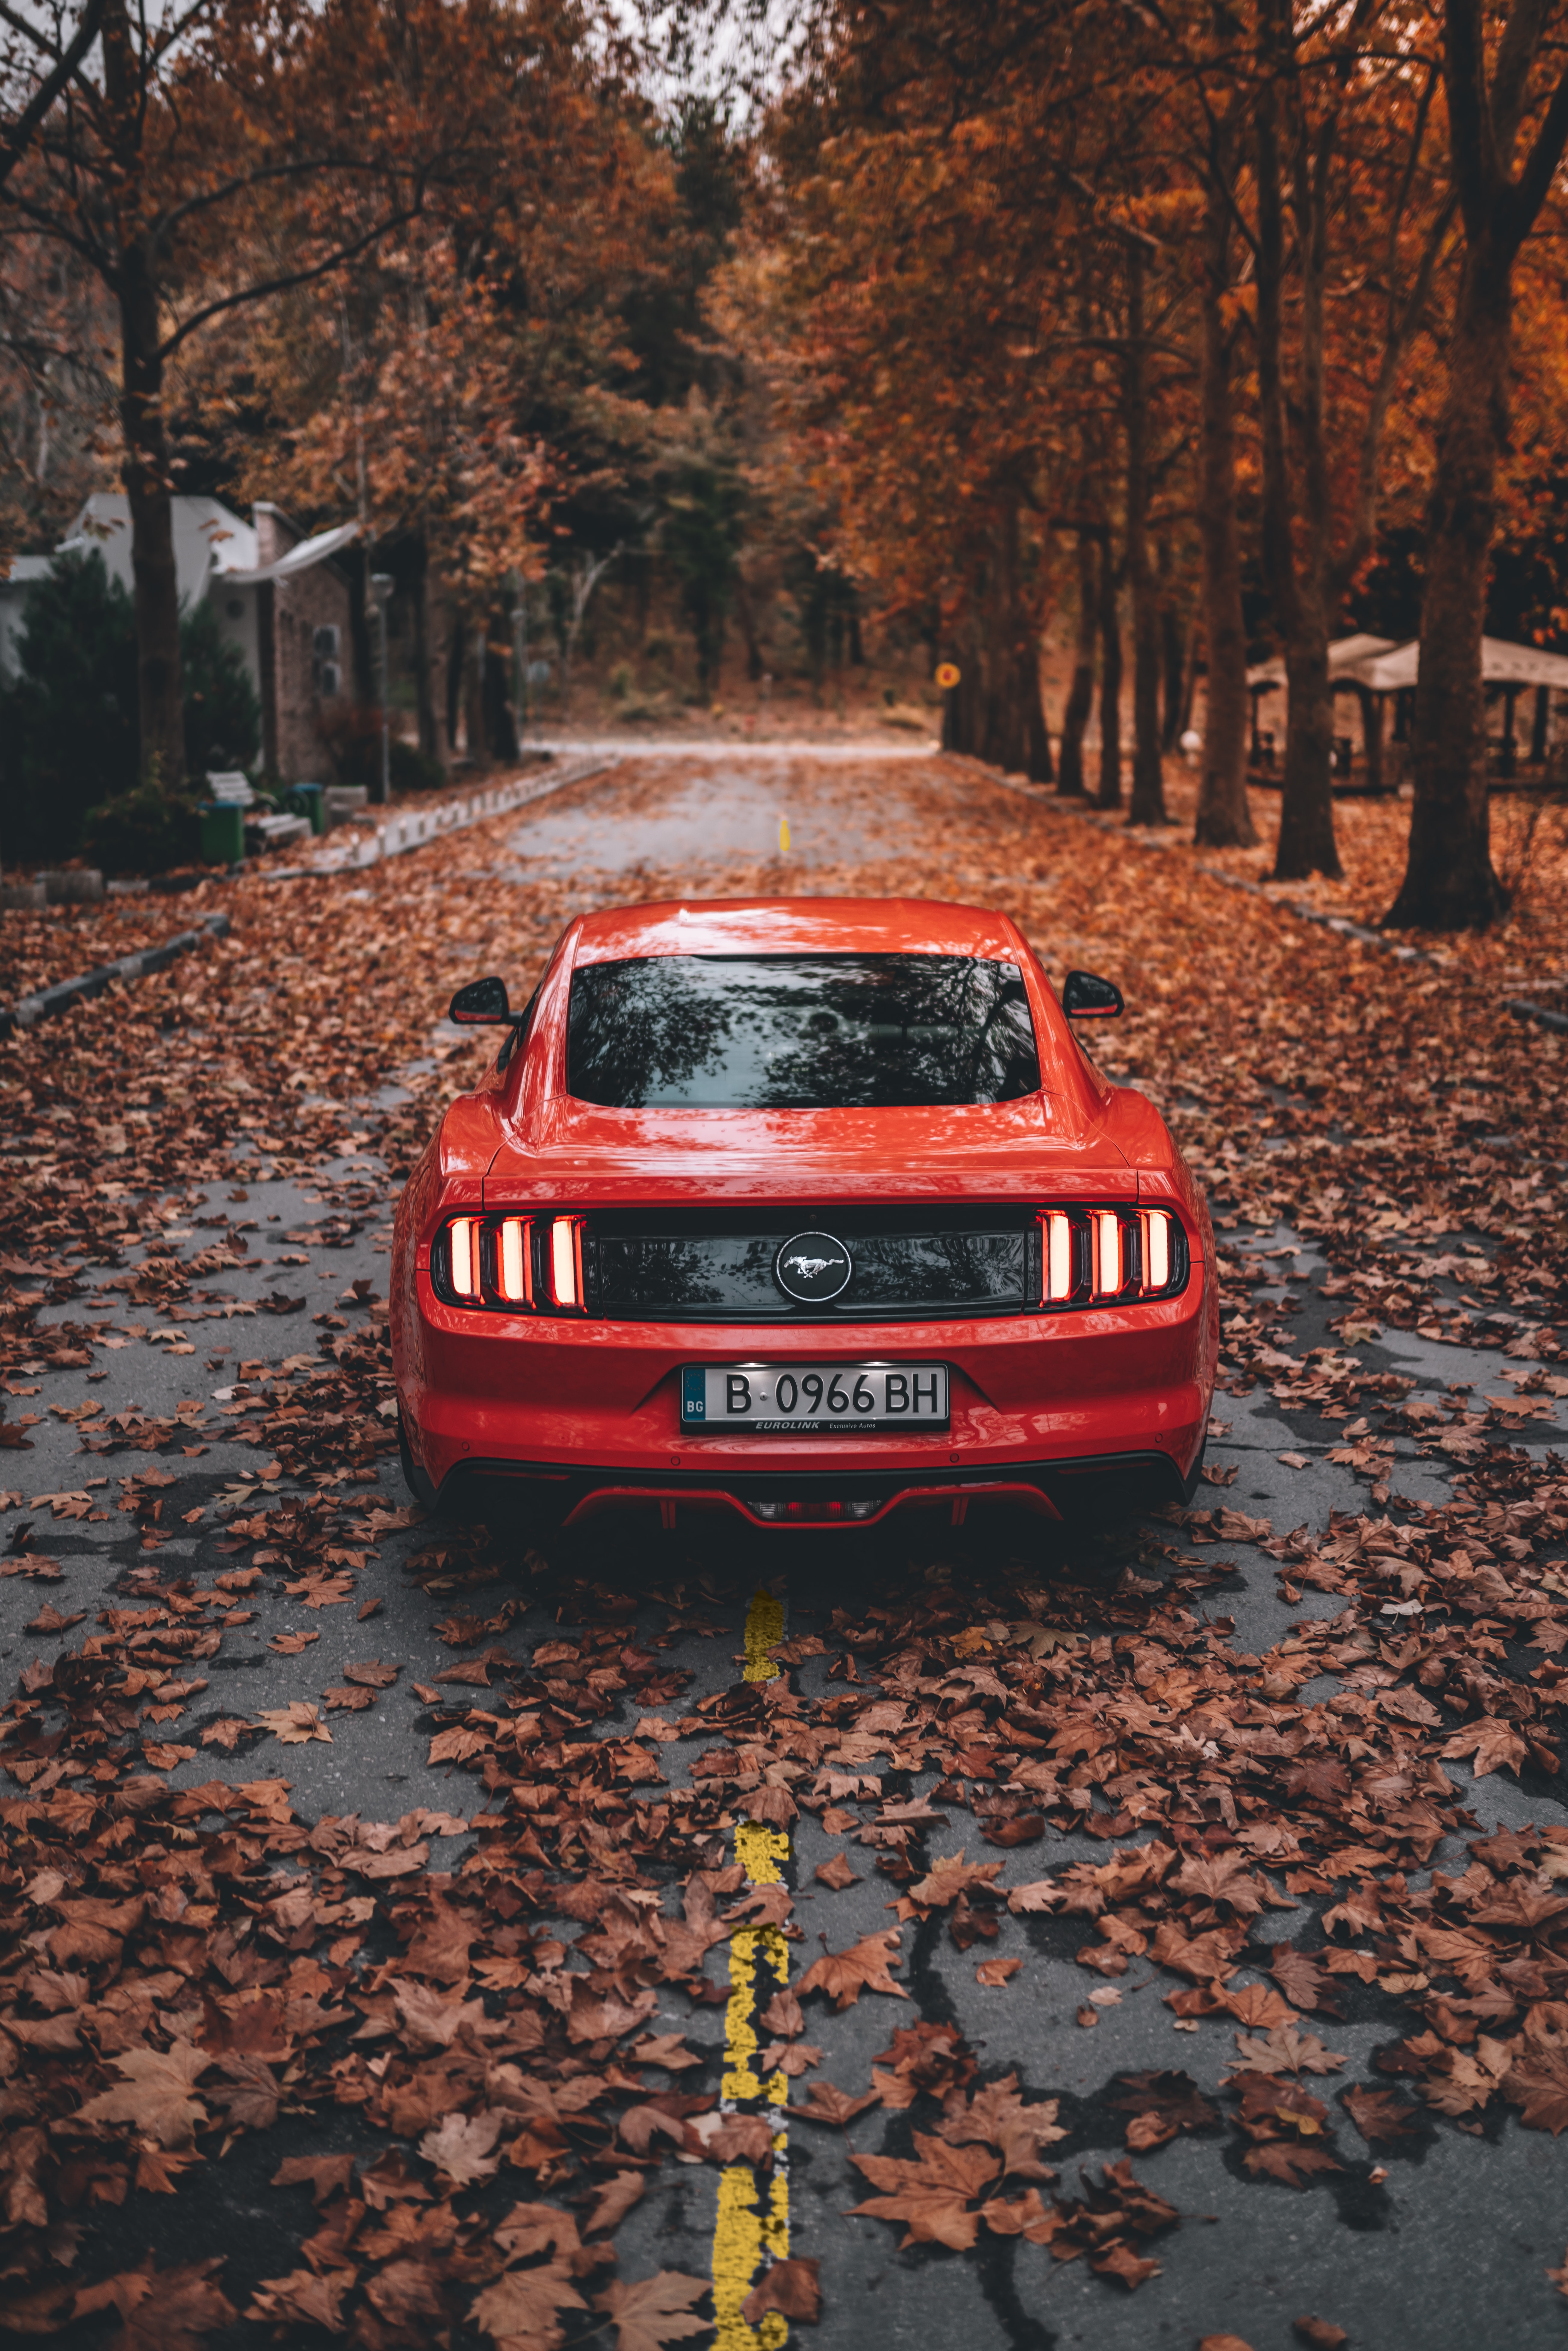 ford mustang, sports car, car, ford, cars, autumn, sports, red, road